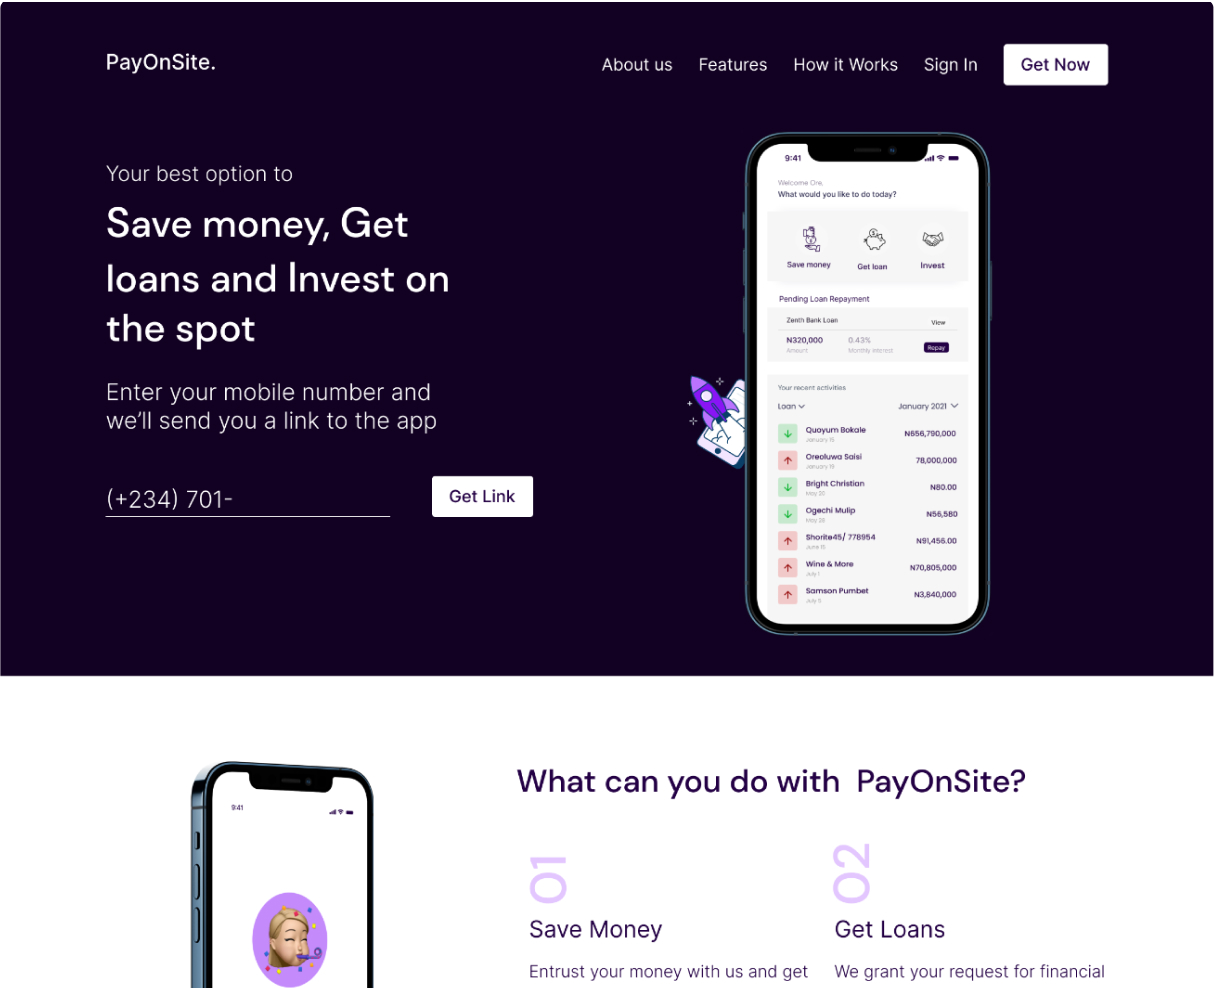 LANDING PAGE FOR PAYONSITE